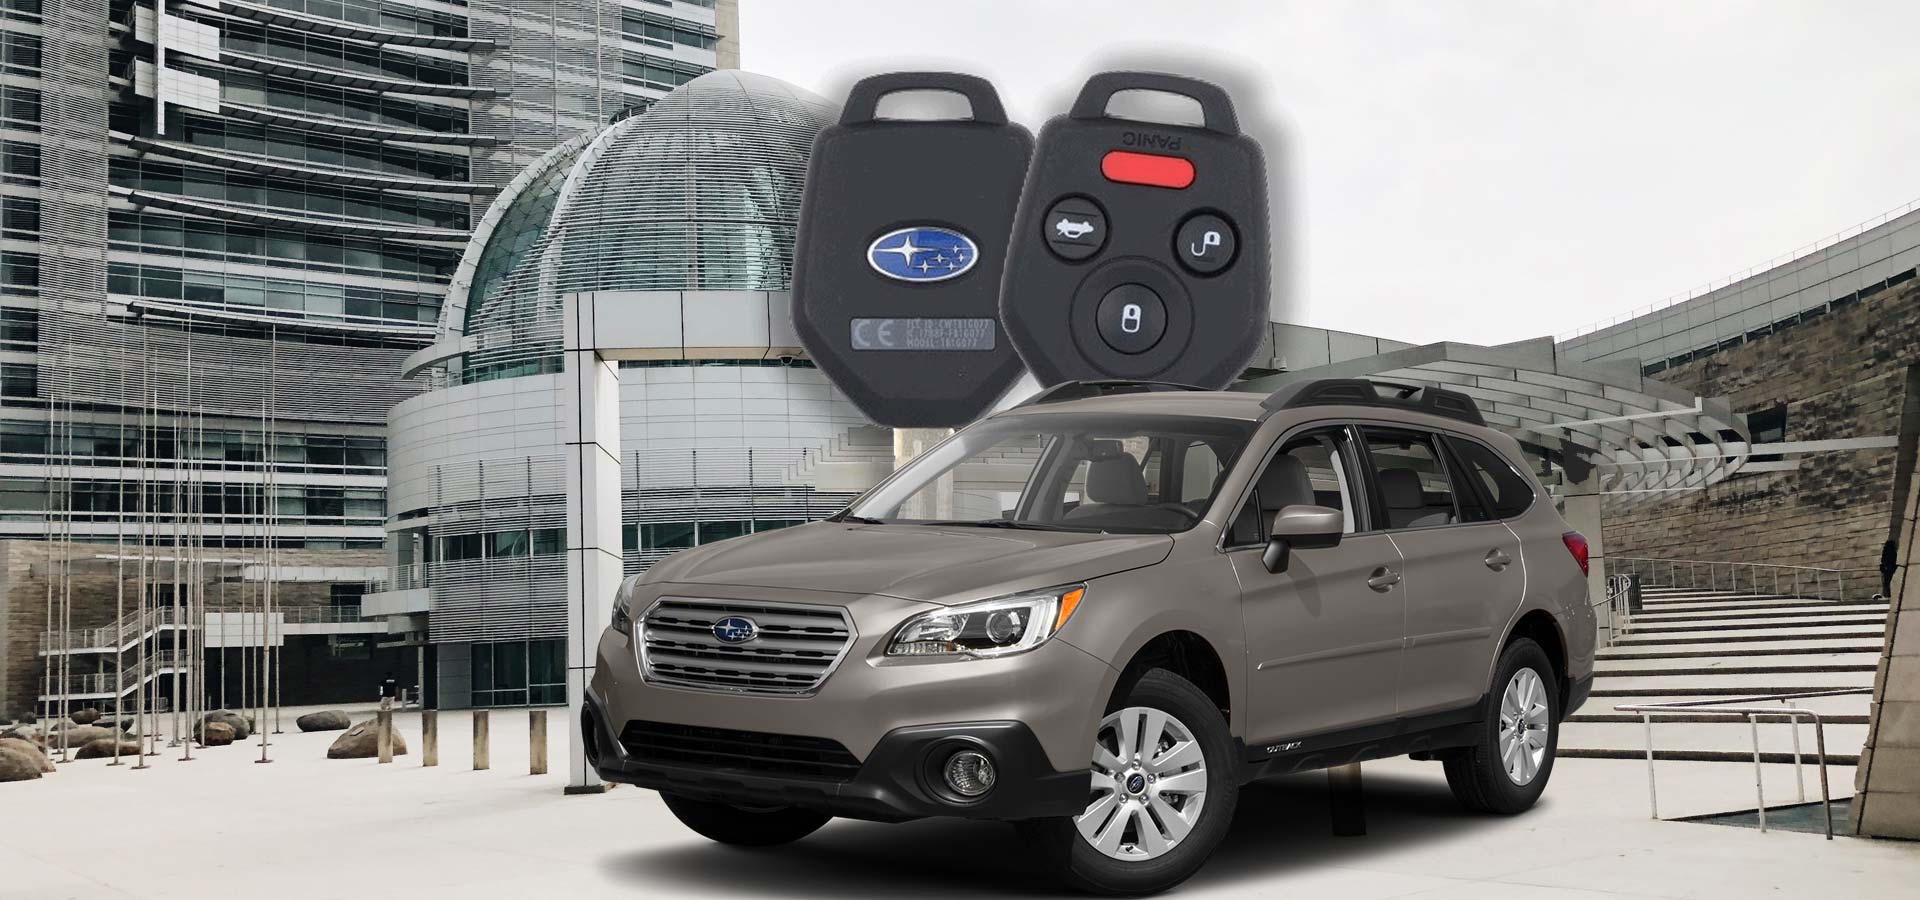 How To Start Subaru With Dead Key Fob The Subaru Key Fob and Getting a Replacement - Buddy's Locksmith